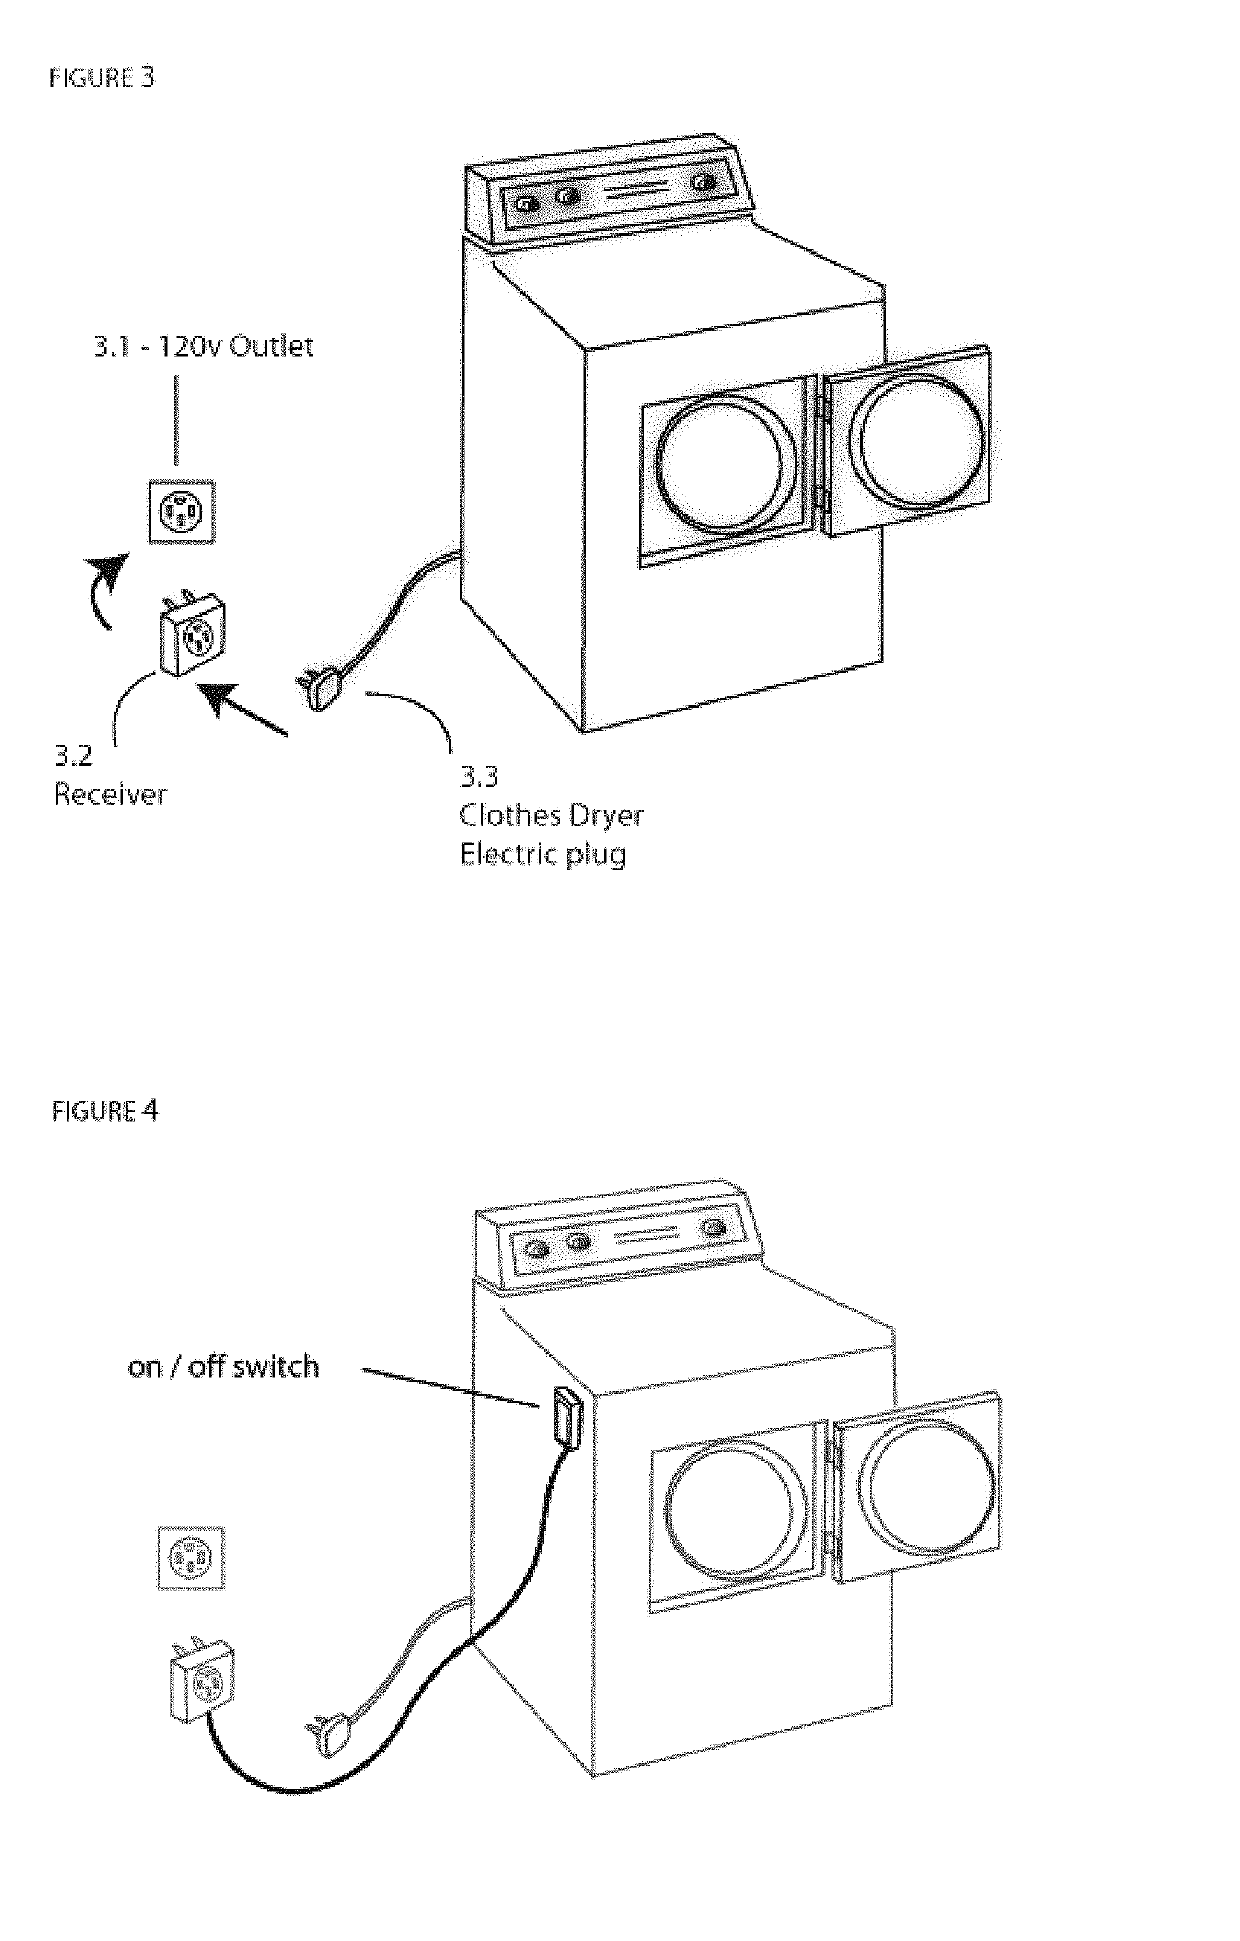 Retrofit moisture and humidity sensor and automatic shutoff device for clothes dryers